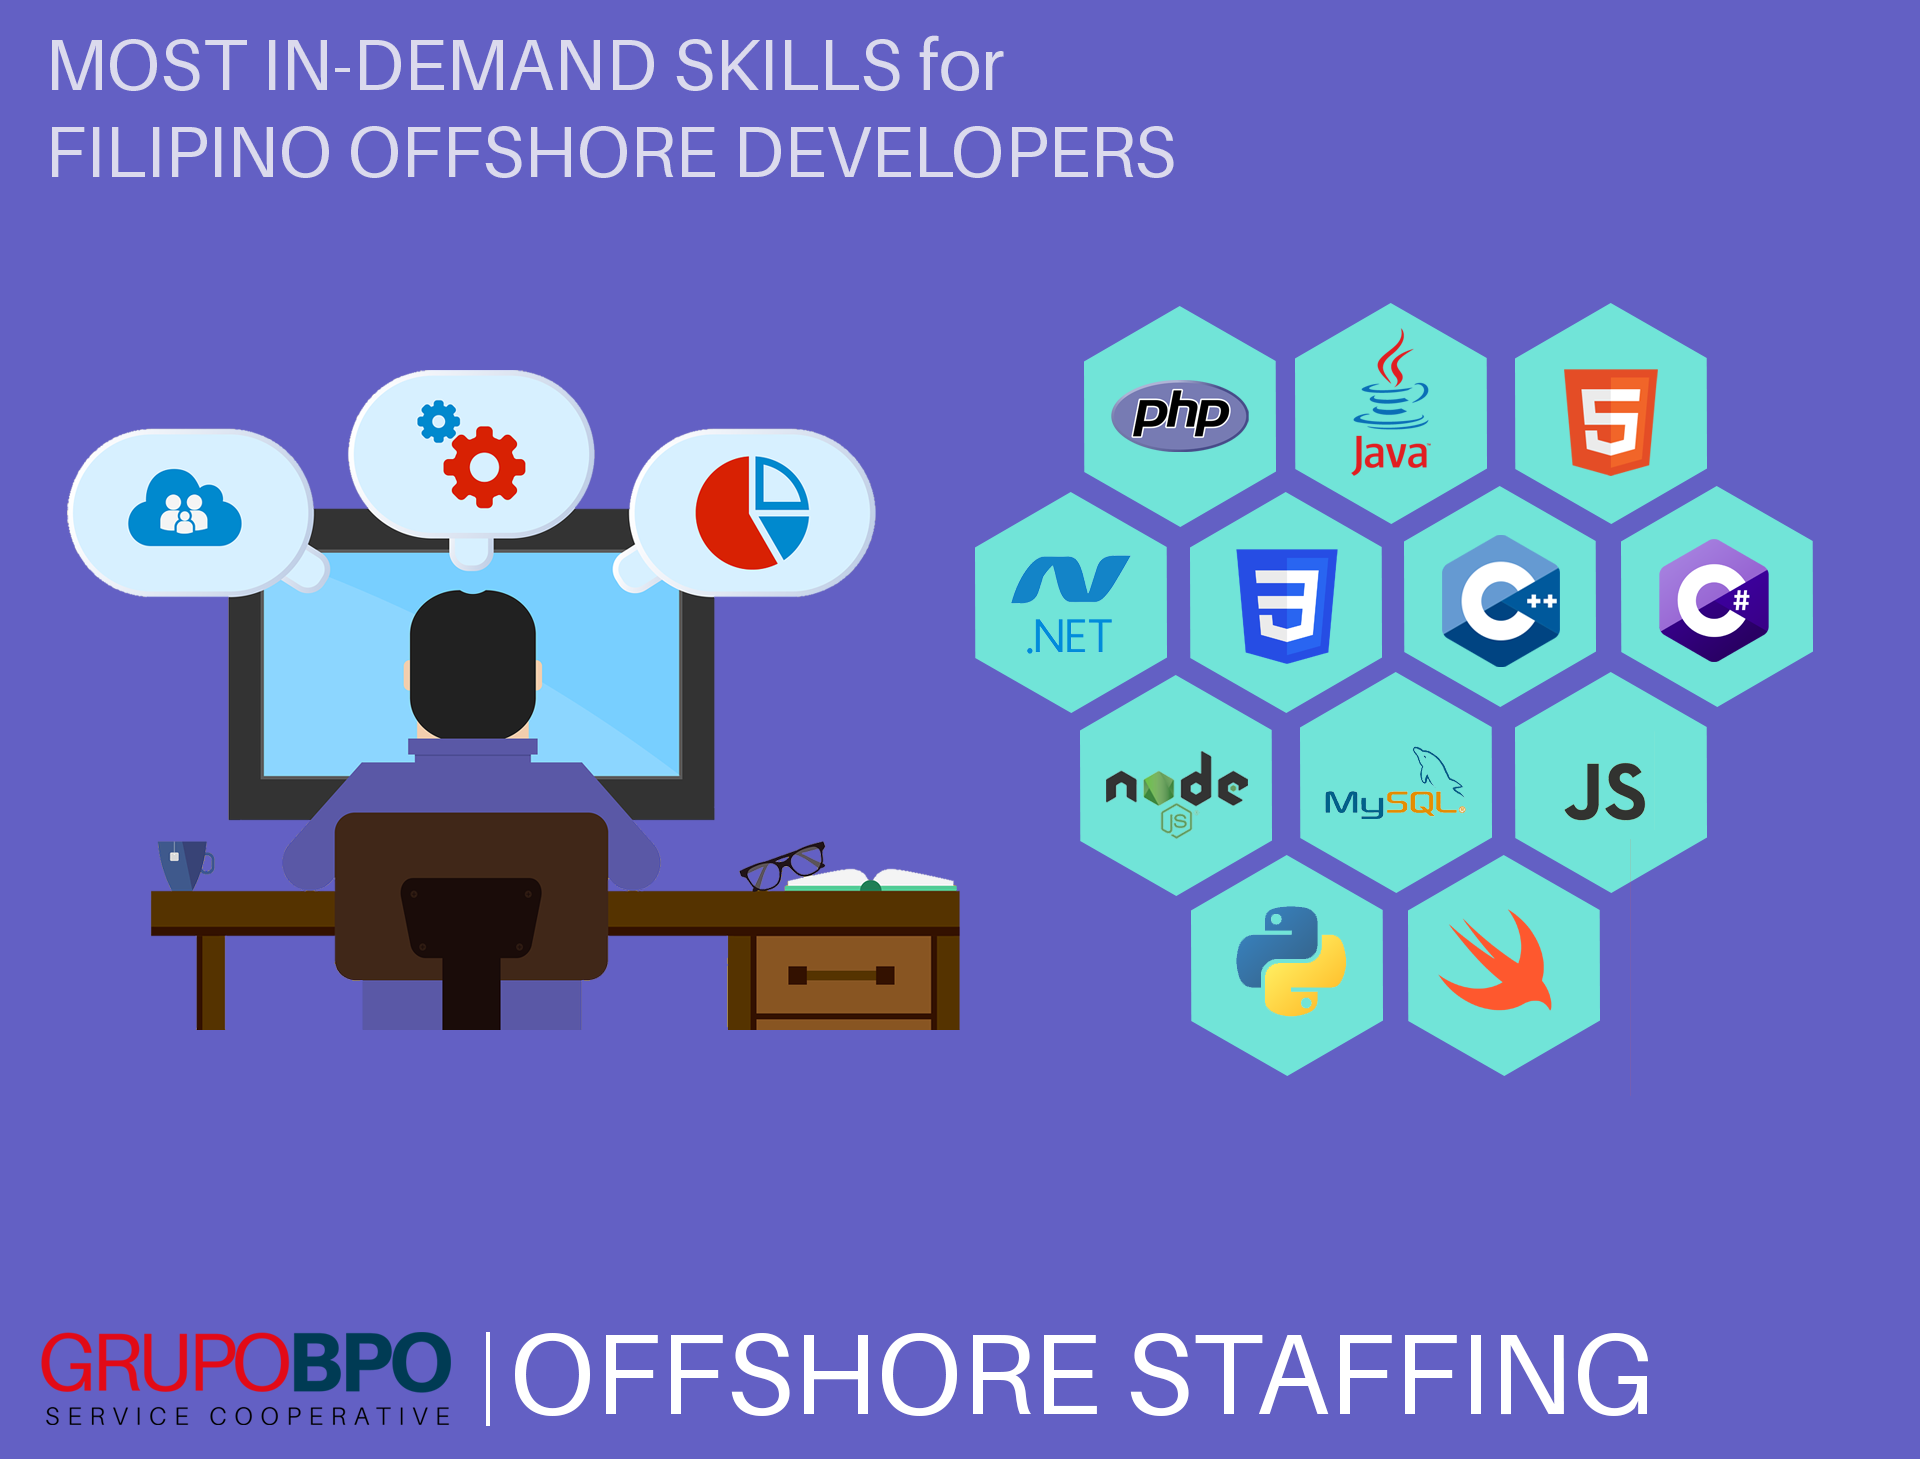 Offshore Software Developers in the Philippines are In-Demand in These Programming Languages